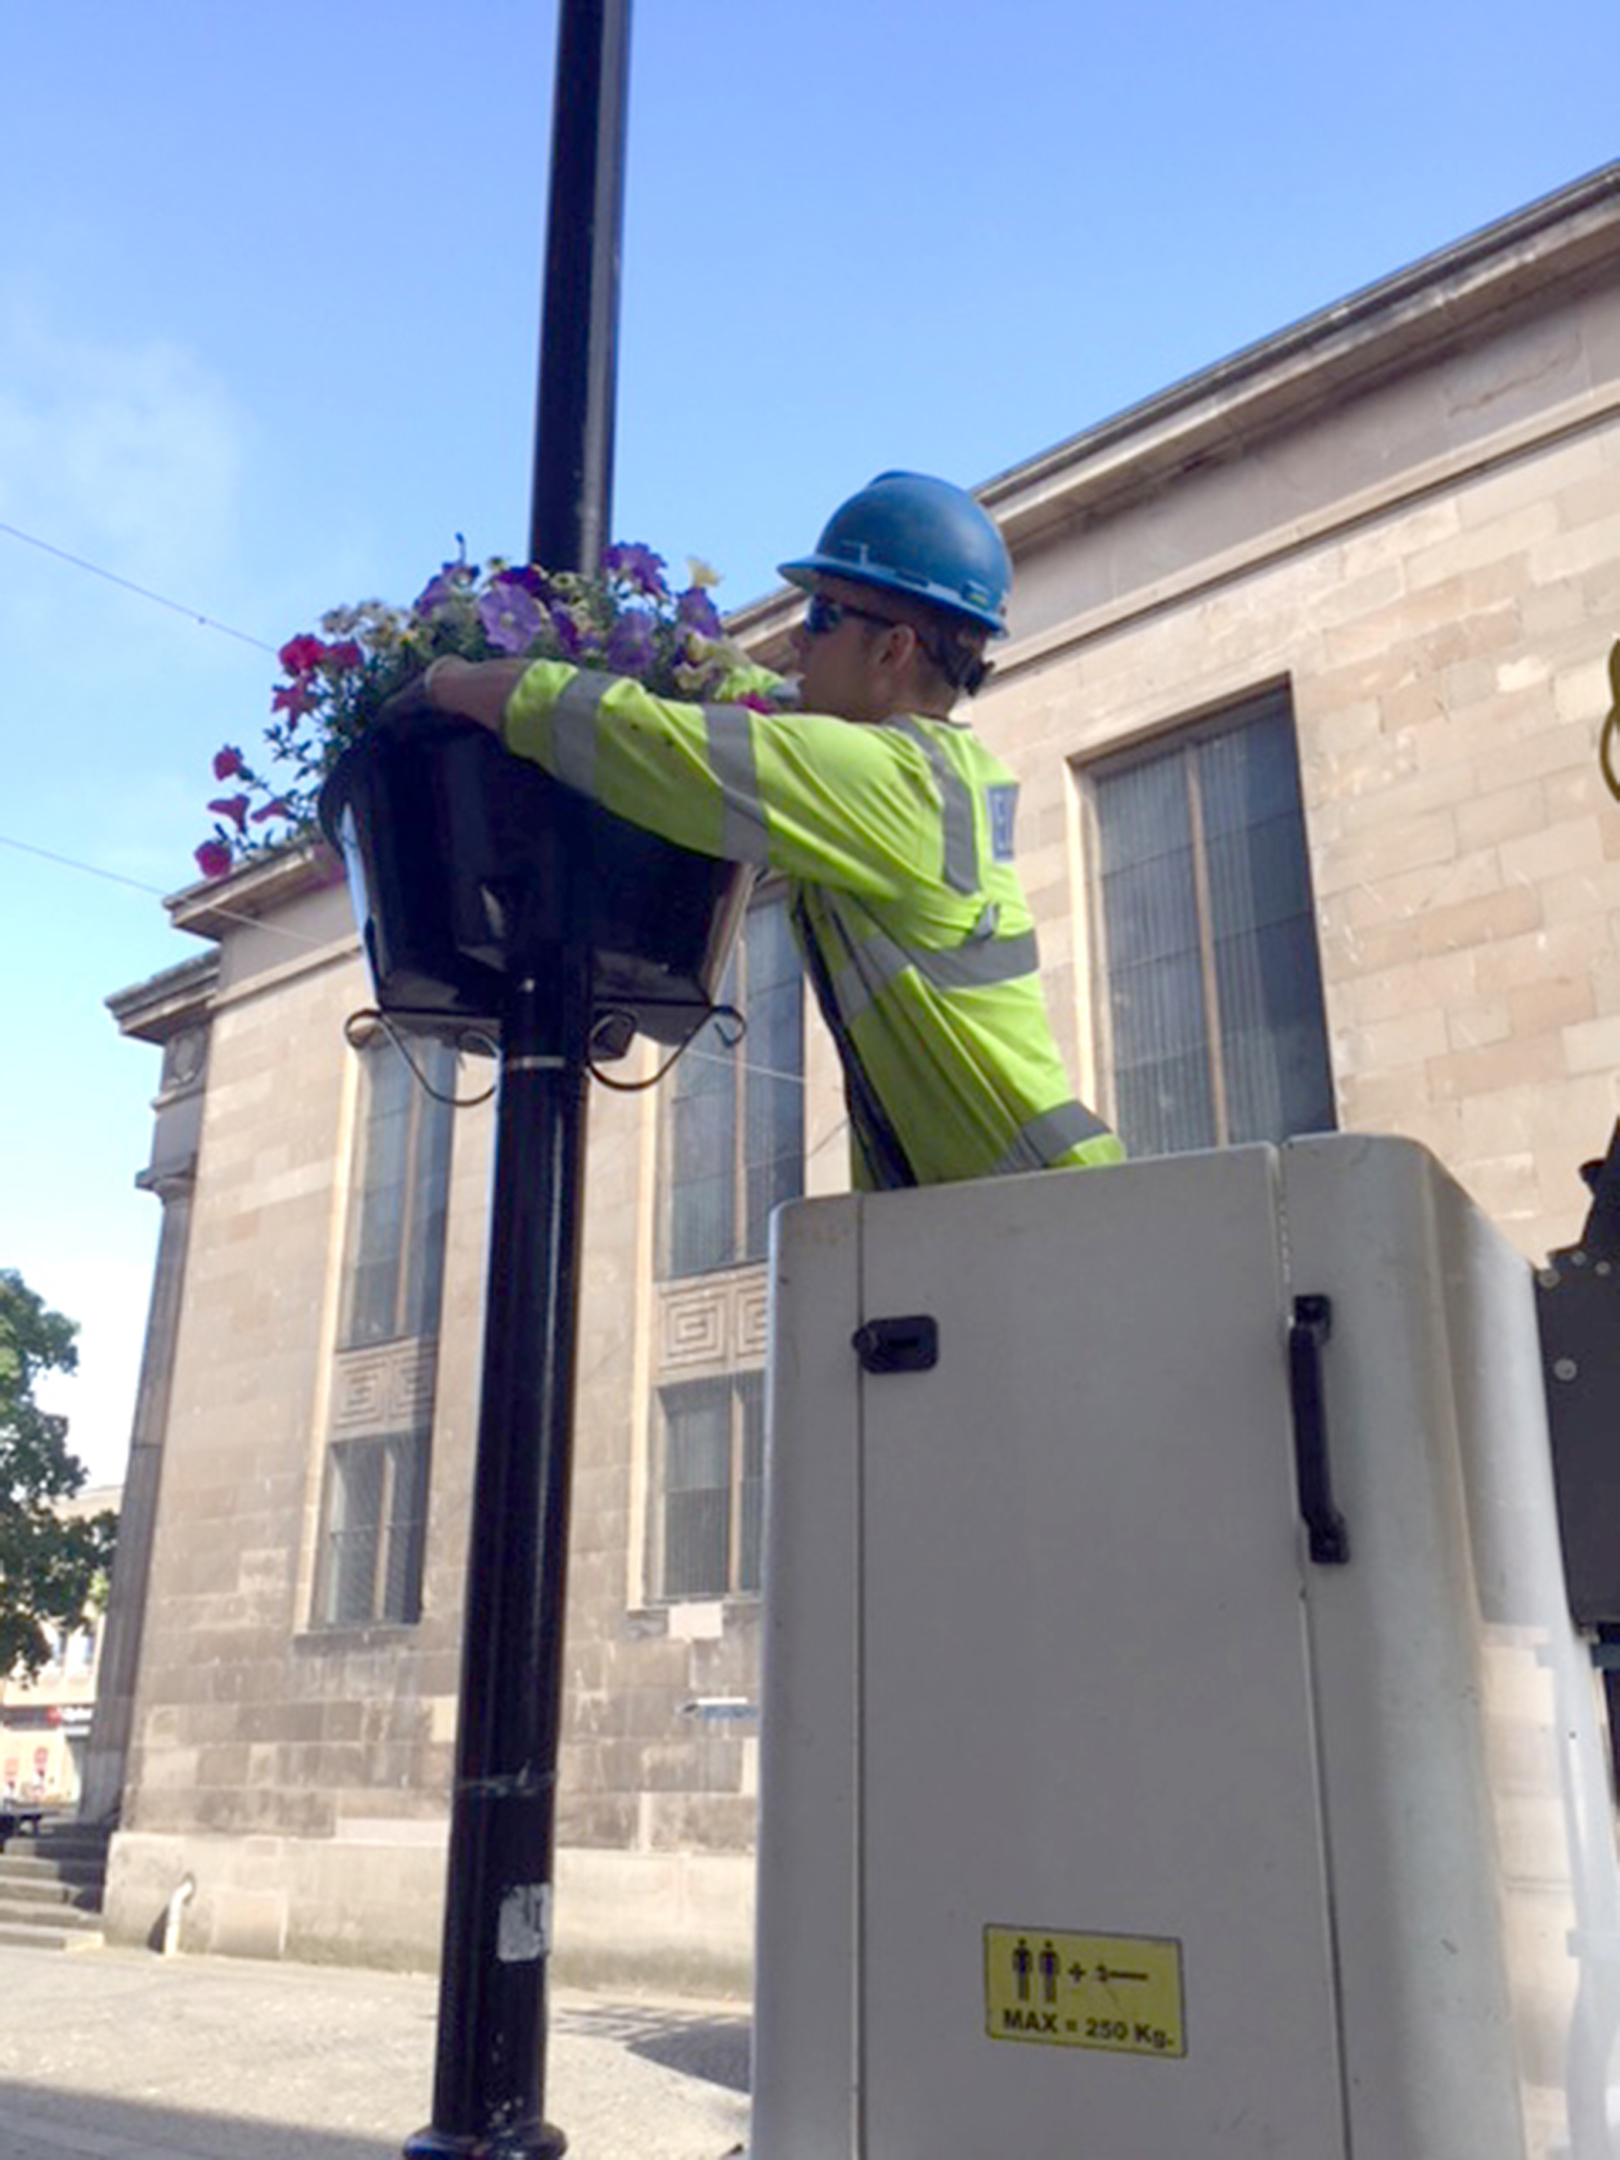 Teams from SSEN helped put up the flower baskets in Elgin town centre.